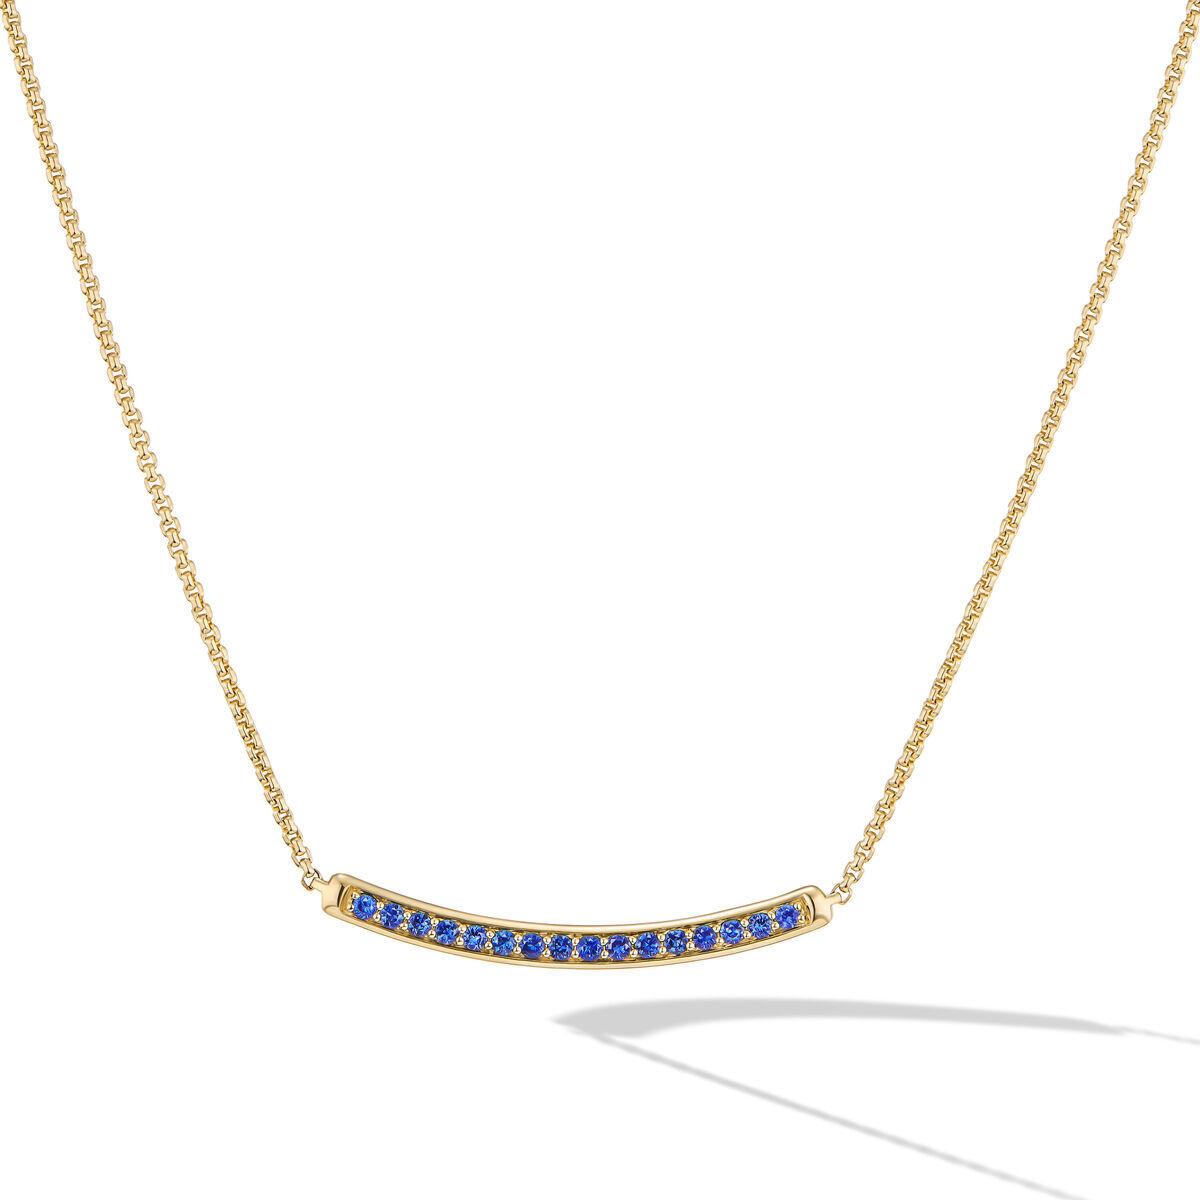 David Yurman Petite Pavé Bar Necklace in 18K Yellow Gold with Blue Sapphires